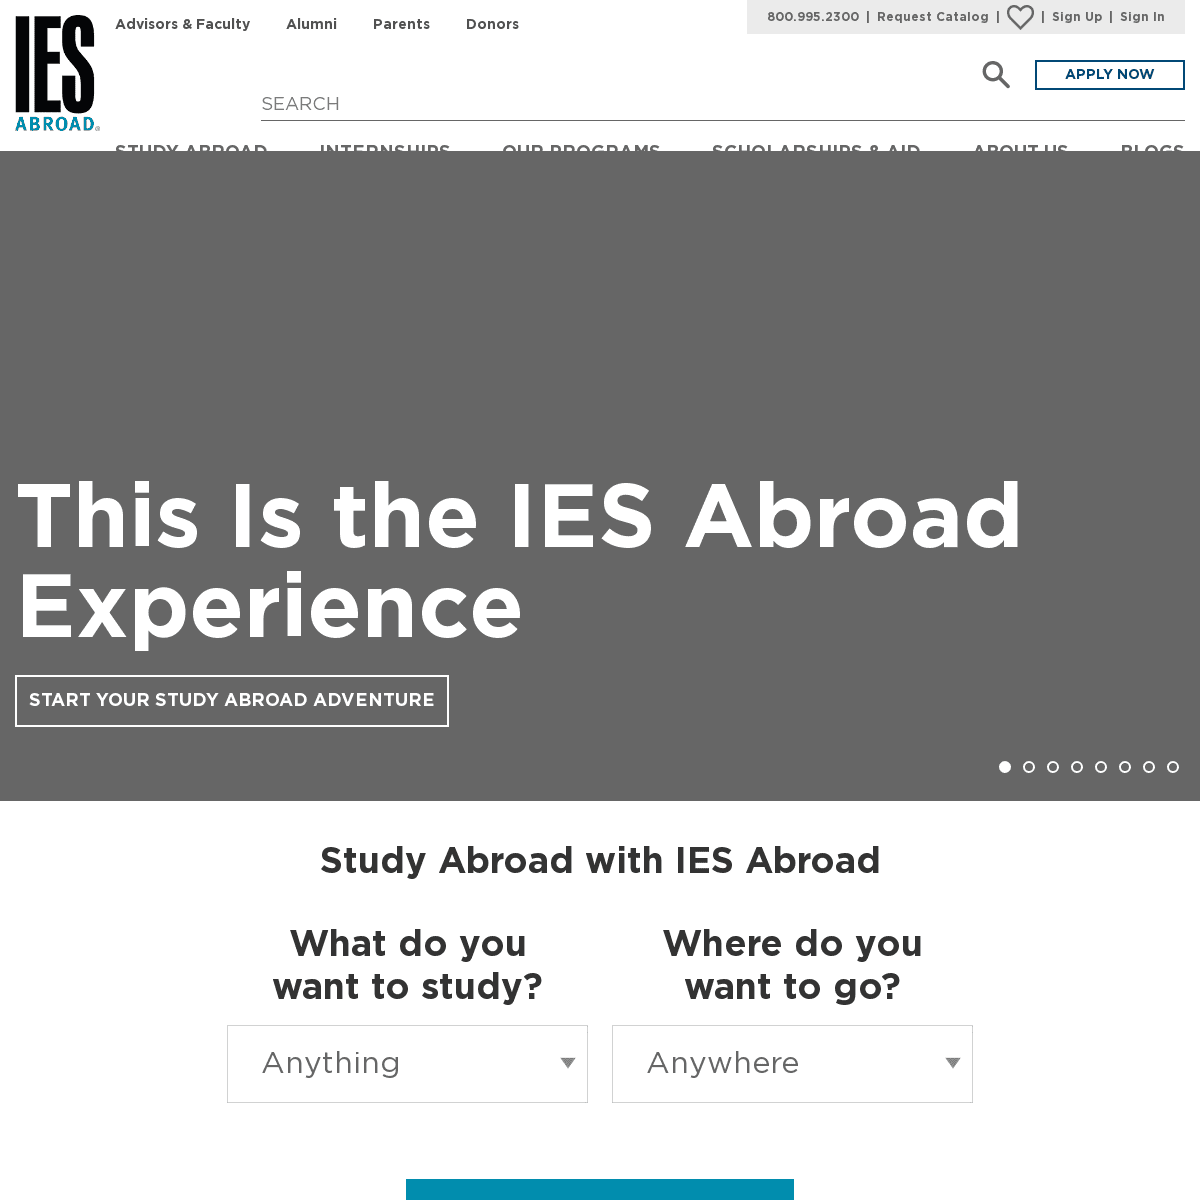 A complete backup of https://iesabroad.org